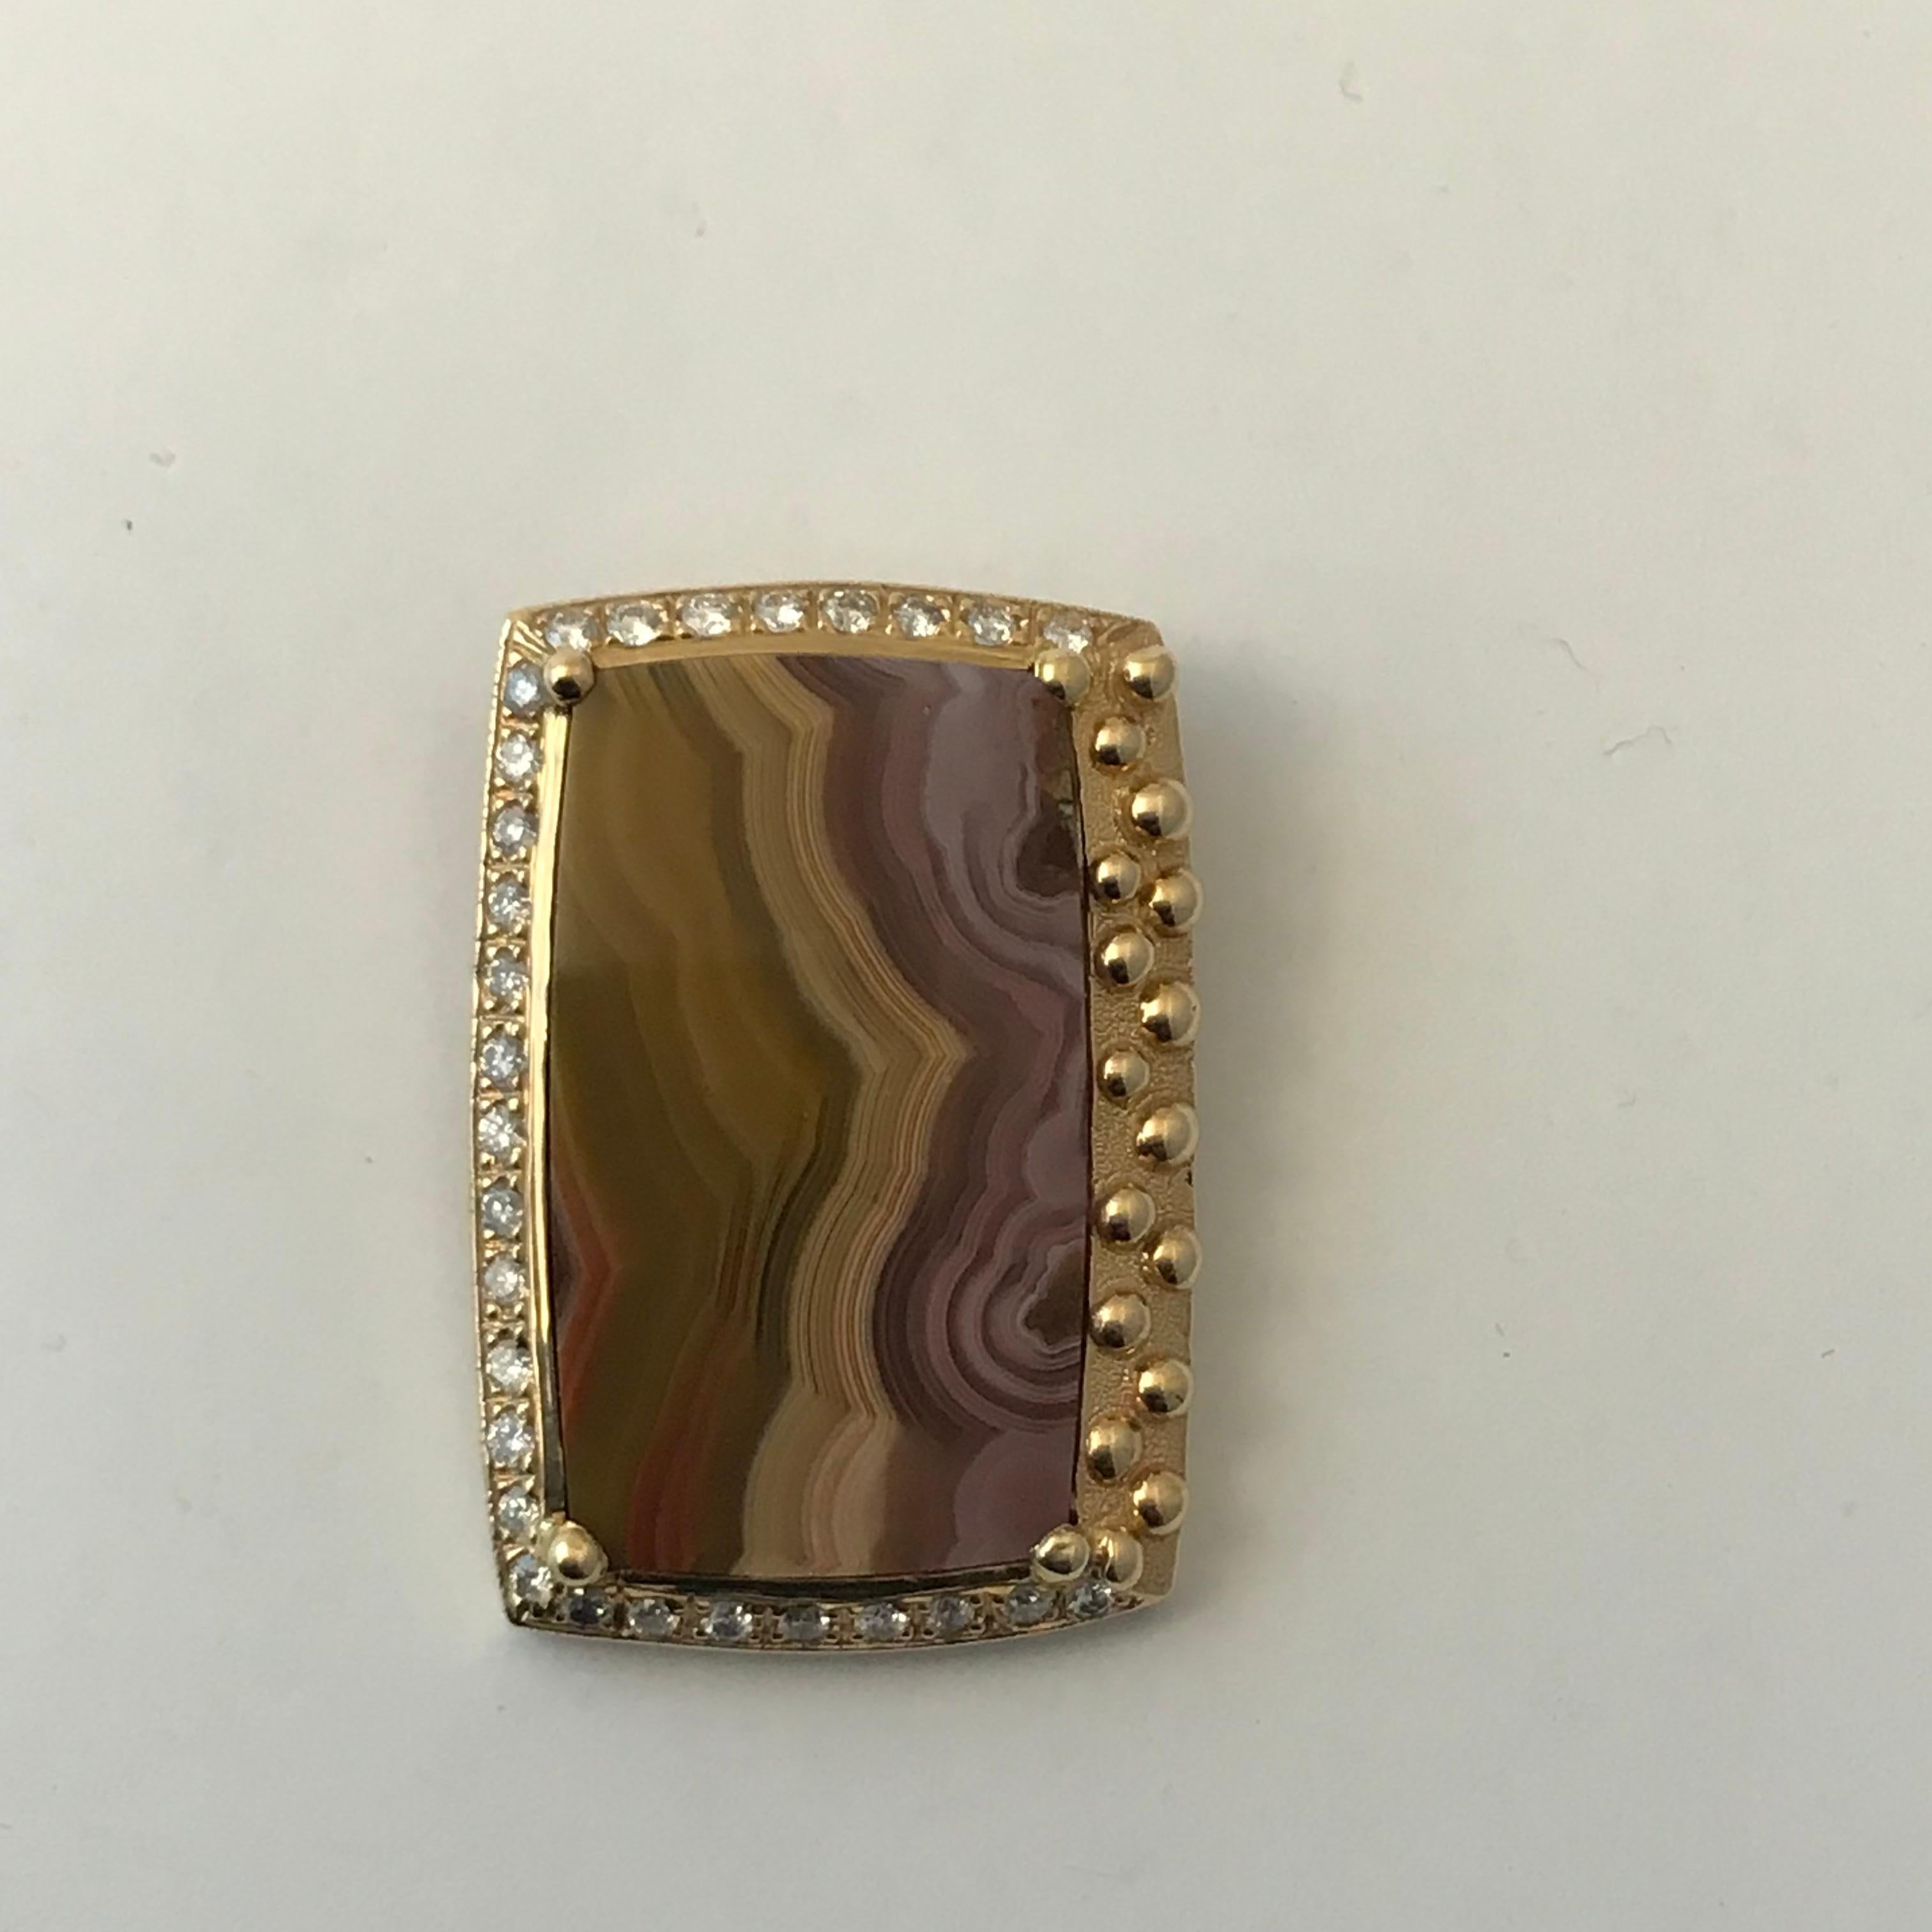 Laguna Agate Pendant with Diamonds in 14 Karat Yellow Gold

Purple and Brown laguna agate in 14k yellow gold with .79cts of diamonds. Chain included. Weighs 4.3 grams. It is 100% natural in color nothing about it has been changed. Nature does some